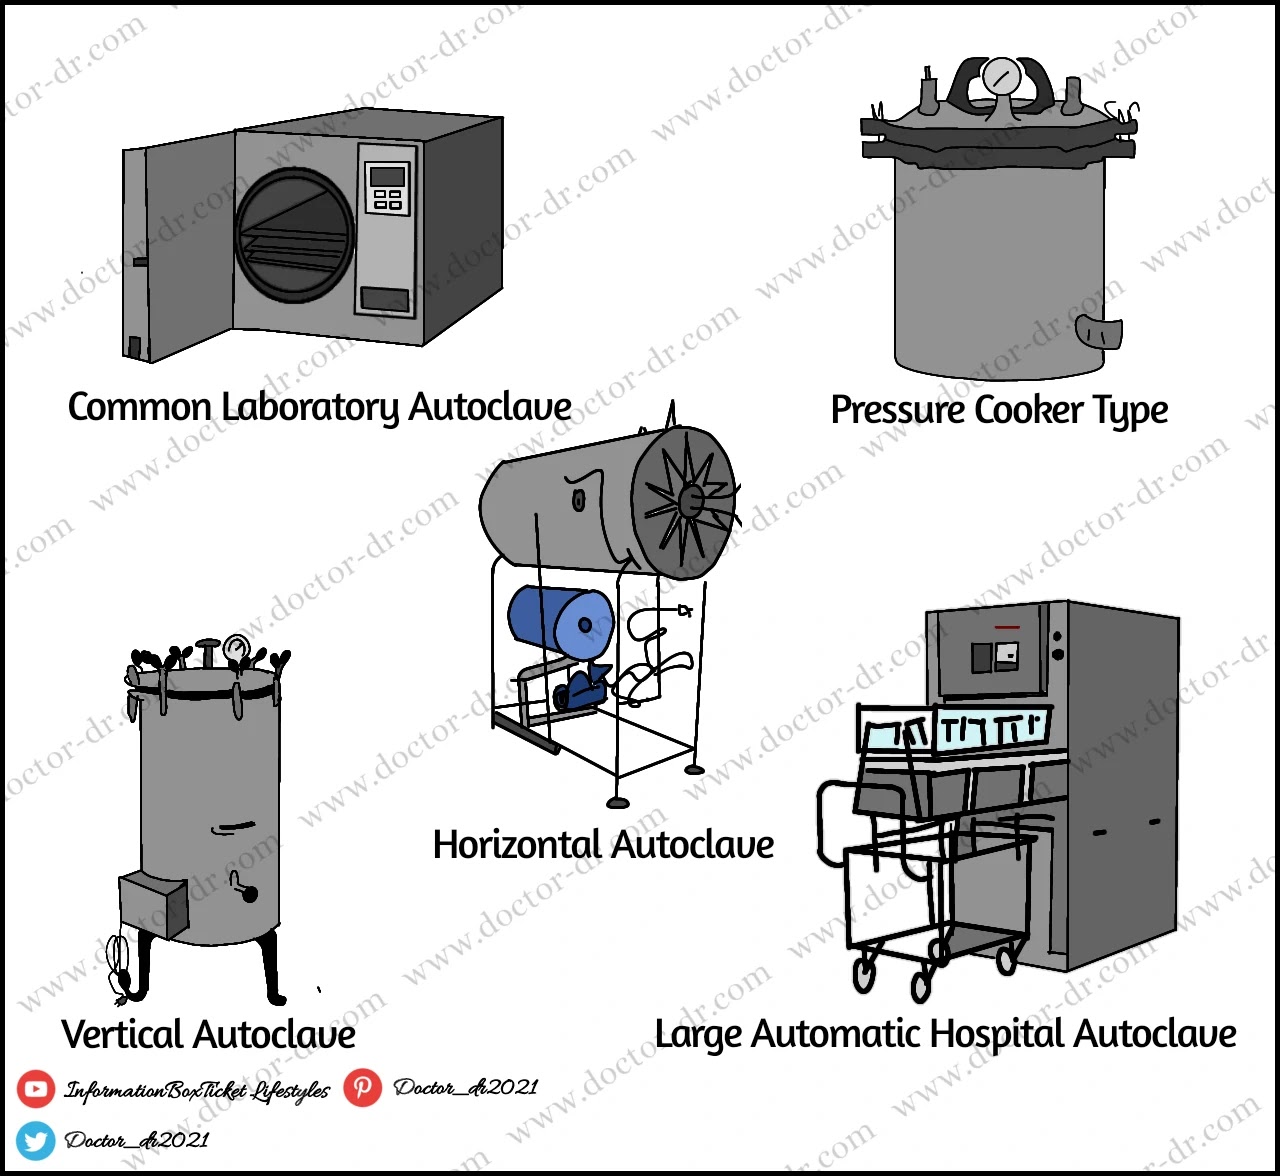 Types of Autoclave There are several different types of autoclaves available on the market, including: Pressure cooker type/ Laboratory bench autoclaves (N-type) There are still many places in the world where people use these as household pressure cookers. A rubber gasket can be used to attach and close the more contemporary version, which has a metal compartment with a secure metal top. It has a safety valve, pressure monitor, and a tap for steam and air release. At the bottom of the container is an electric immersion warmer. Gravity displacement type autoclave This is the sterilizer that is most frequently used in labs. In this kind of autoclave, the heating device creates steam inside the chamber, which circulates throughout the room for sterilization. Comparatively speaking, this kind of sterilizer is less expensive than others. Positive pressure displacement type (B-type) In the case of this type of autoclave, the steam is produced in a different steam generator and then introduced into the autoclave. This autoclave is quicker because the steam can be produced in just a few seconds. Compared to gravity displacement autoclaves, this variety is an upgrade. Negative pressure displacement type (S-type) A steam engine and a vacuum generator are both present in this kind of sterilizer. Here, the steam generator produces steam while the vacuum generator removes all of the air from the sterilizer. The sterilizer is then filled with vapor. This autoclave variety is the most frequently advised because it is highly accurate and gets a high degree of sterility guarantee. This form of autoclave is also the most costly.